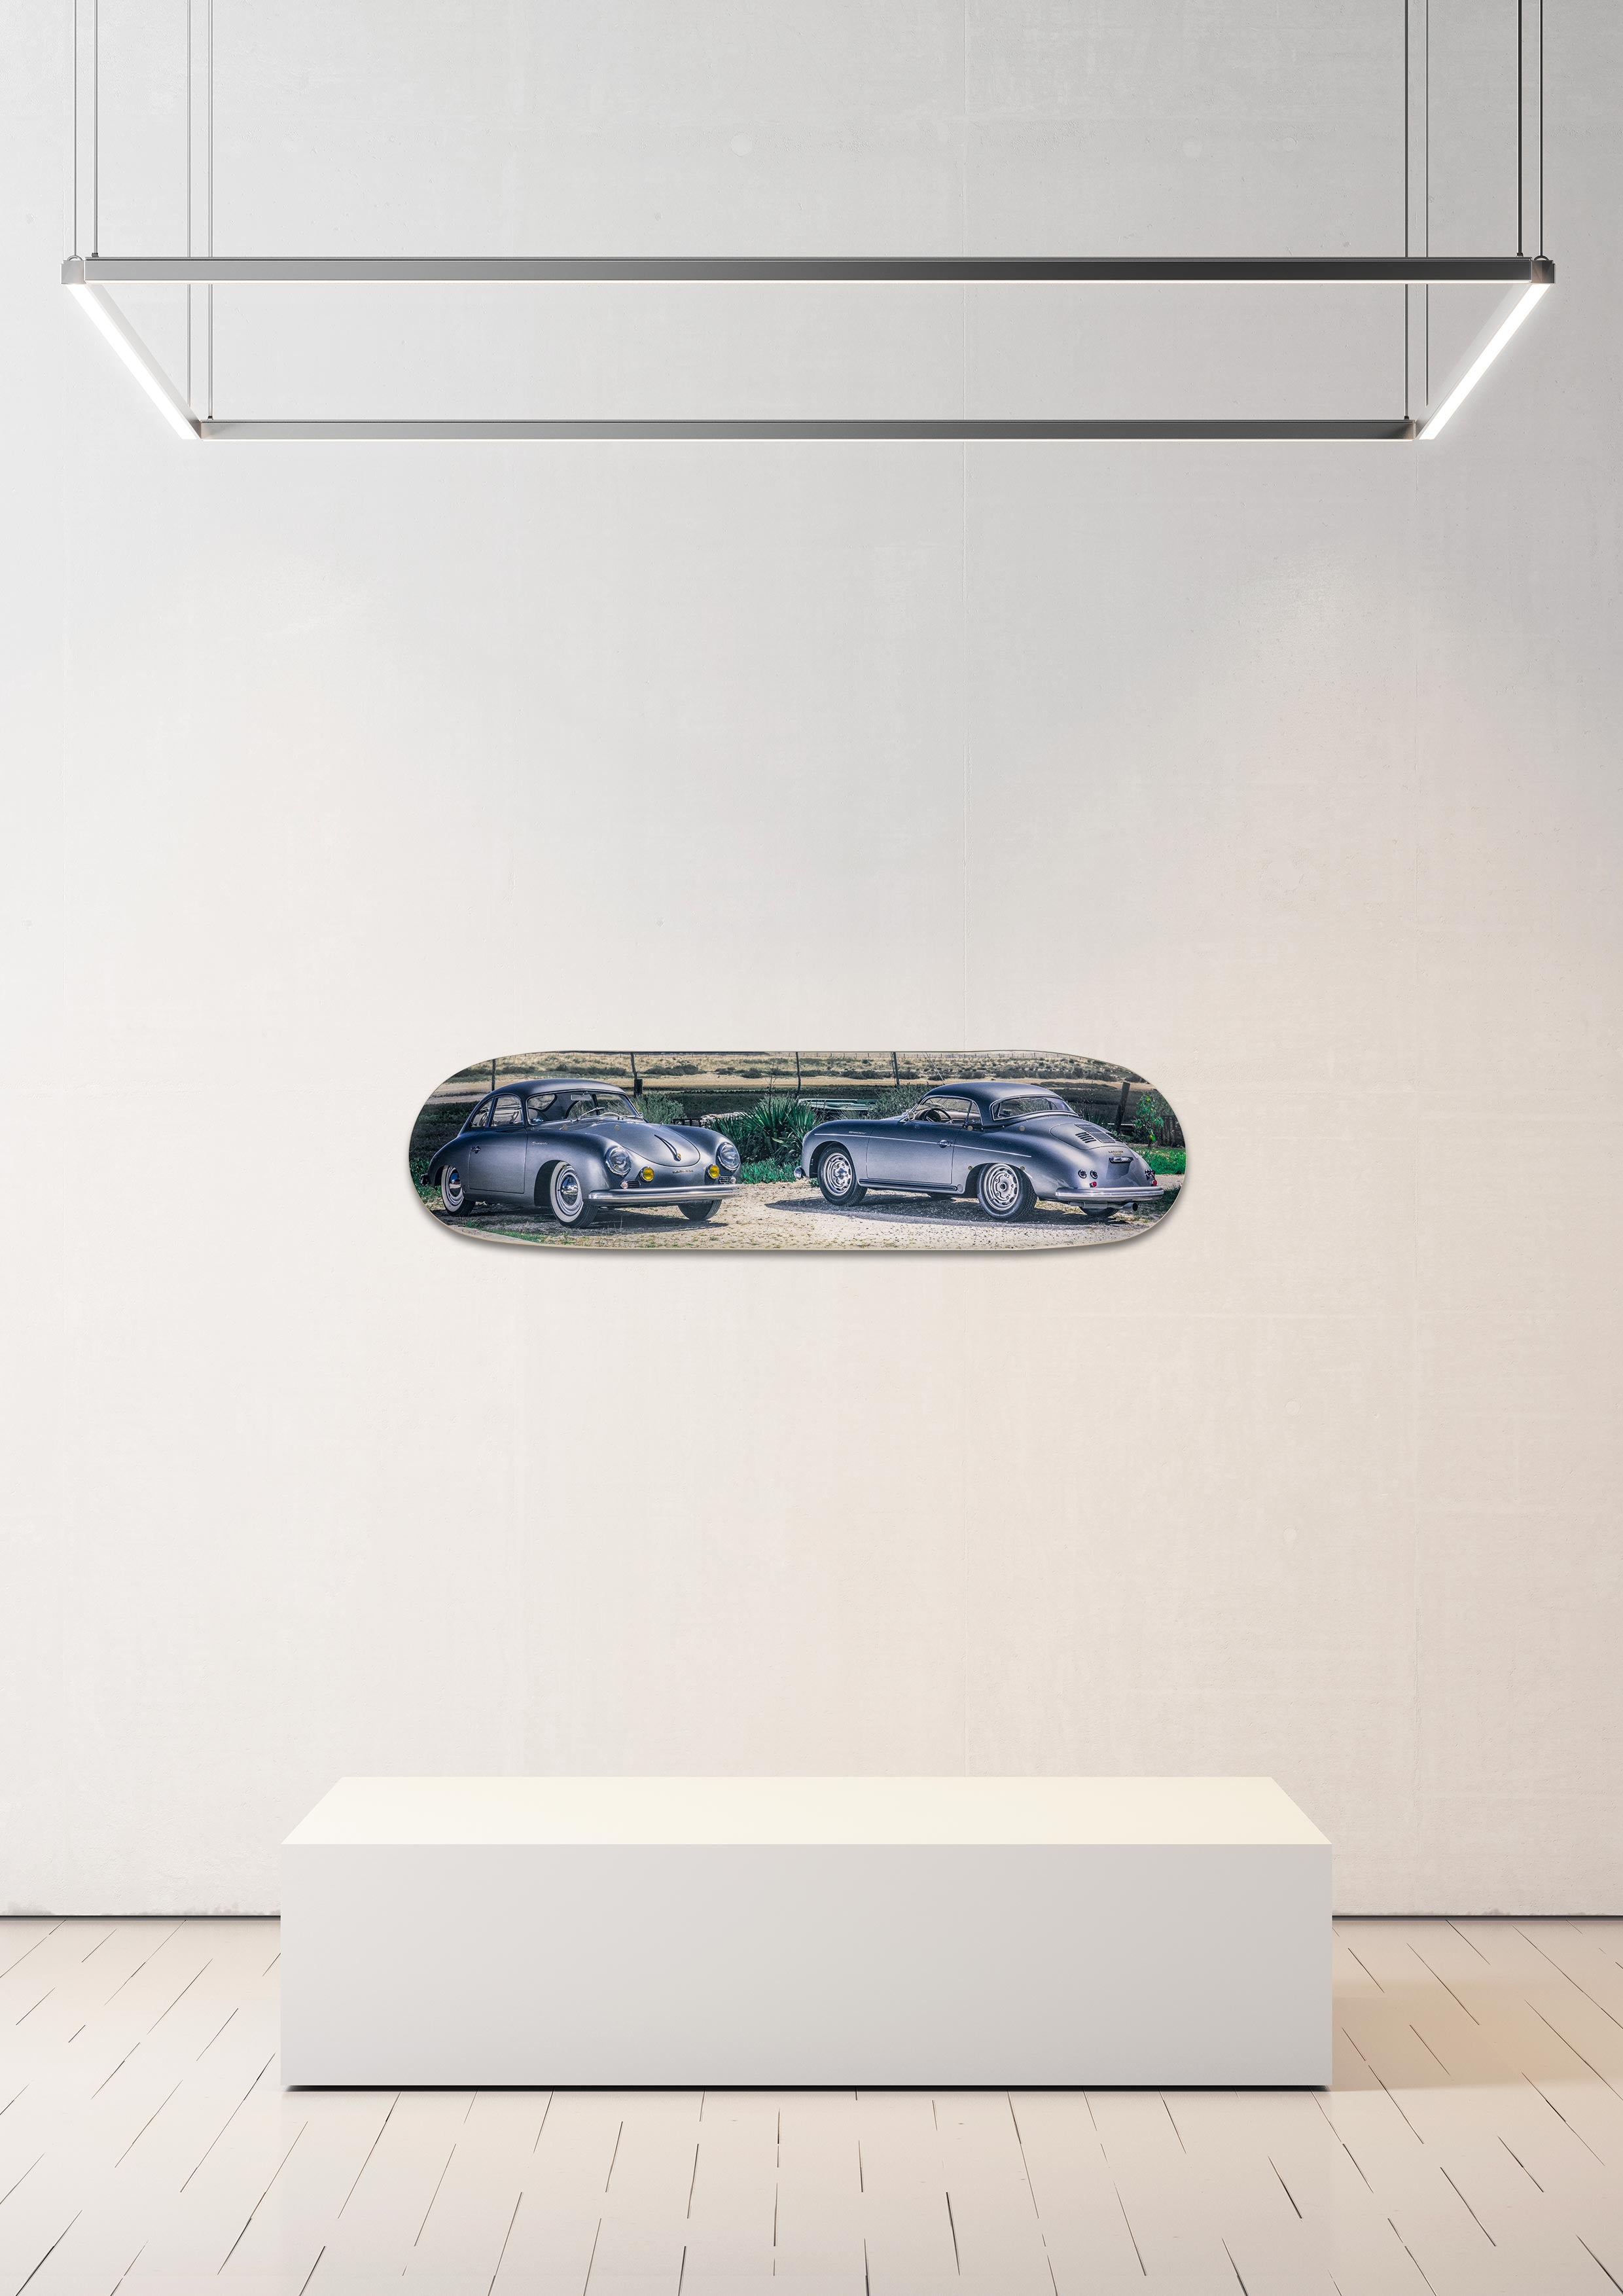 Wall skate board - very limited edition duo of Porsche 356 GT - Serge Heitz